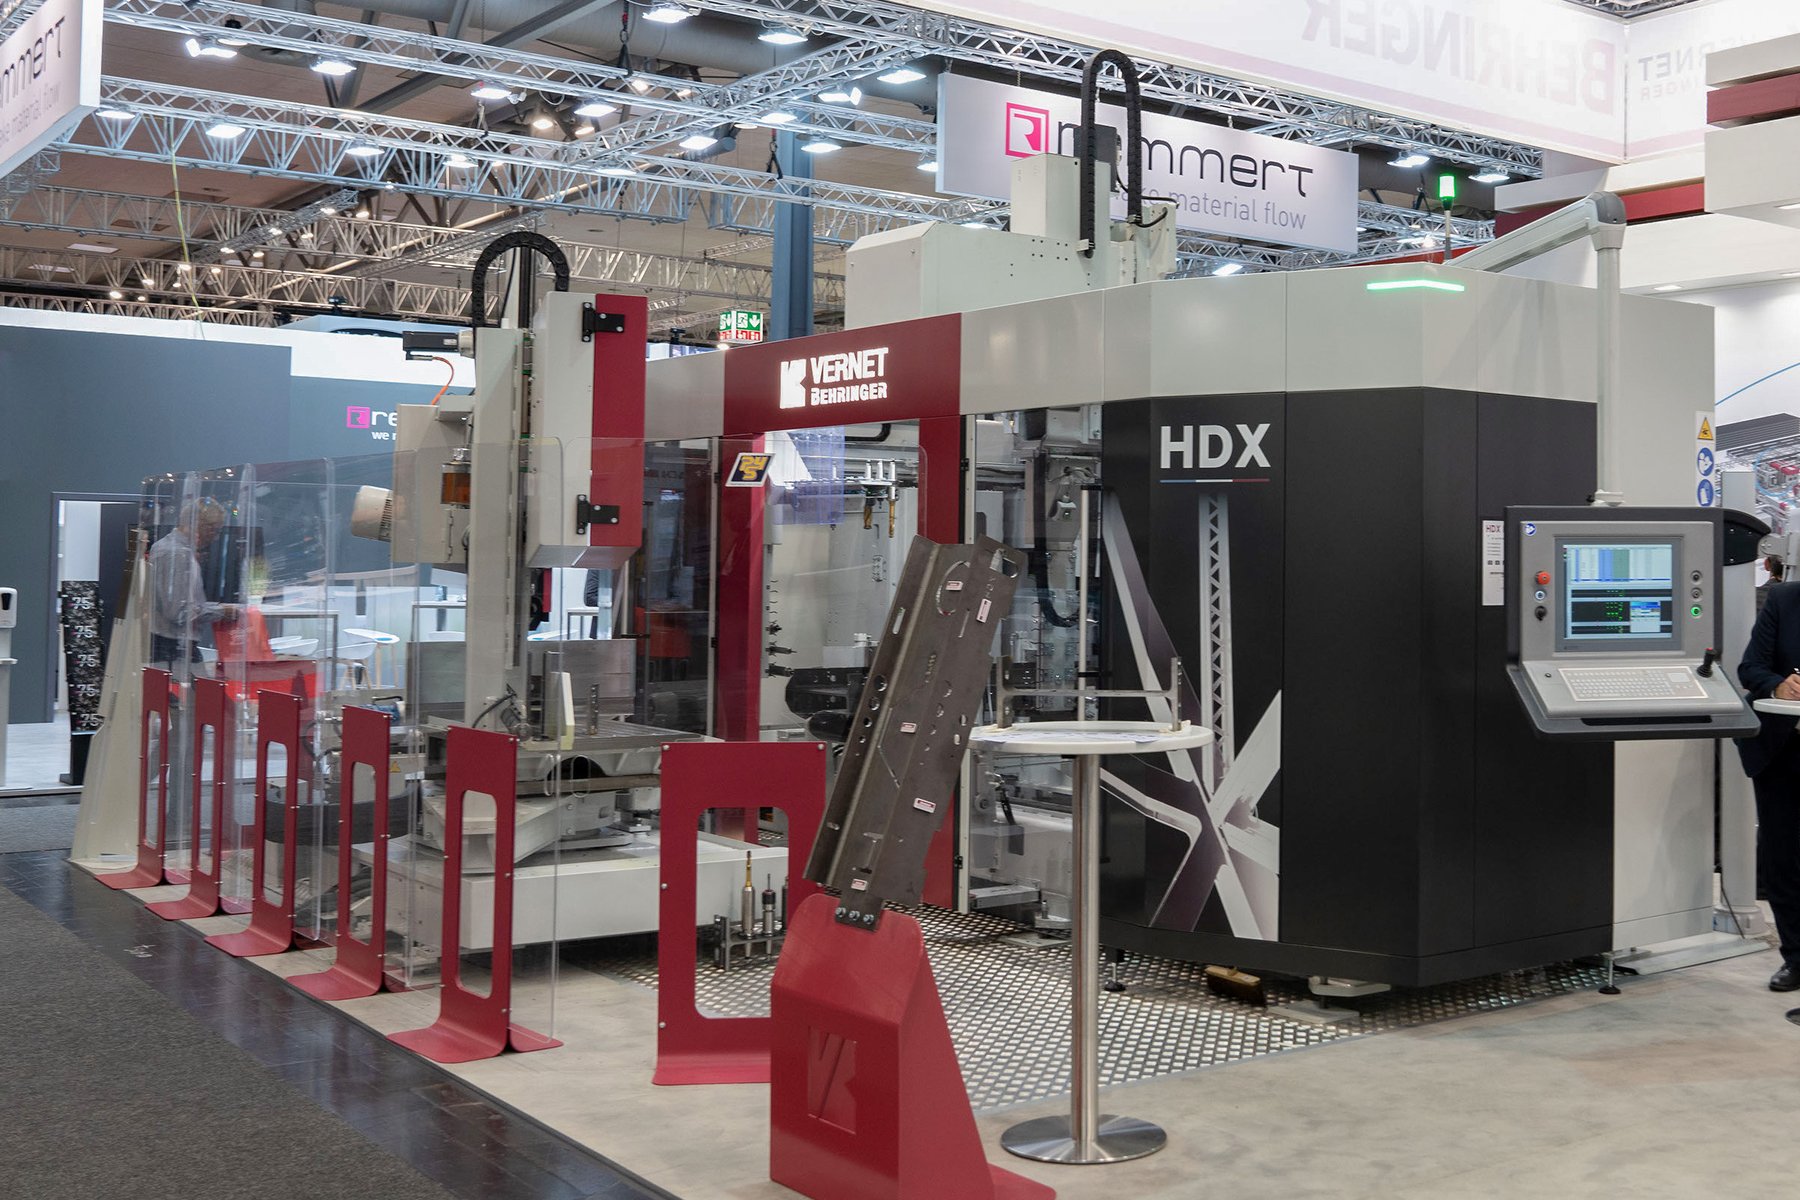 Vernet Behringer HDX Beam Drilling and Milling Machine at Euroblech 2022